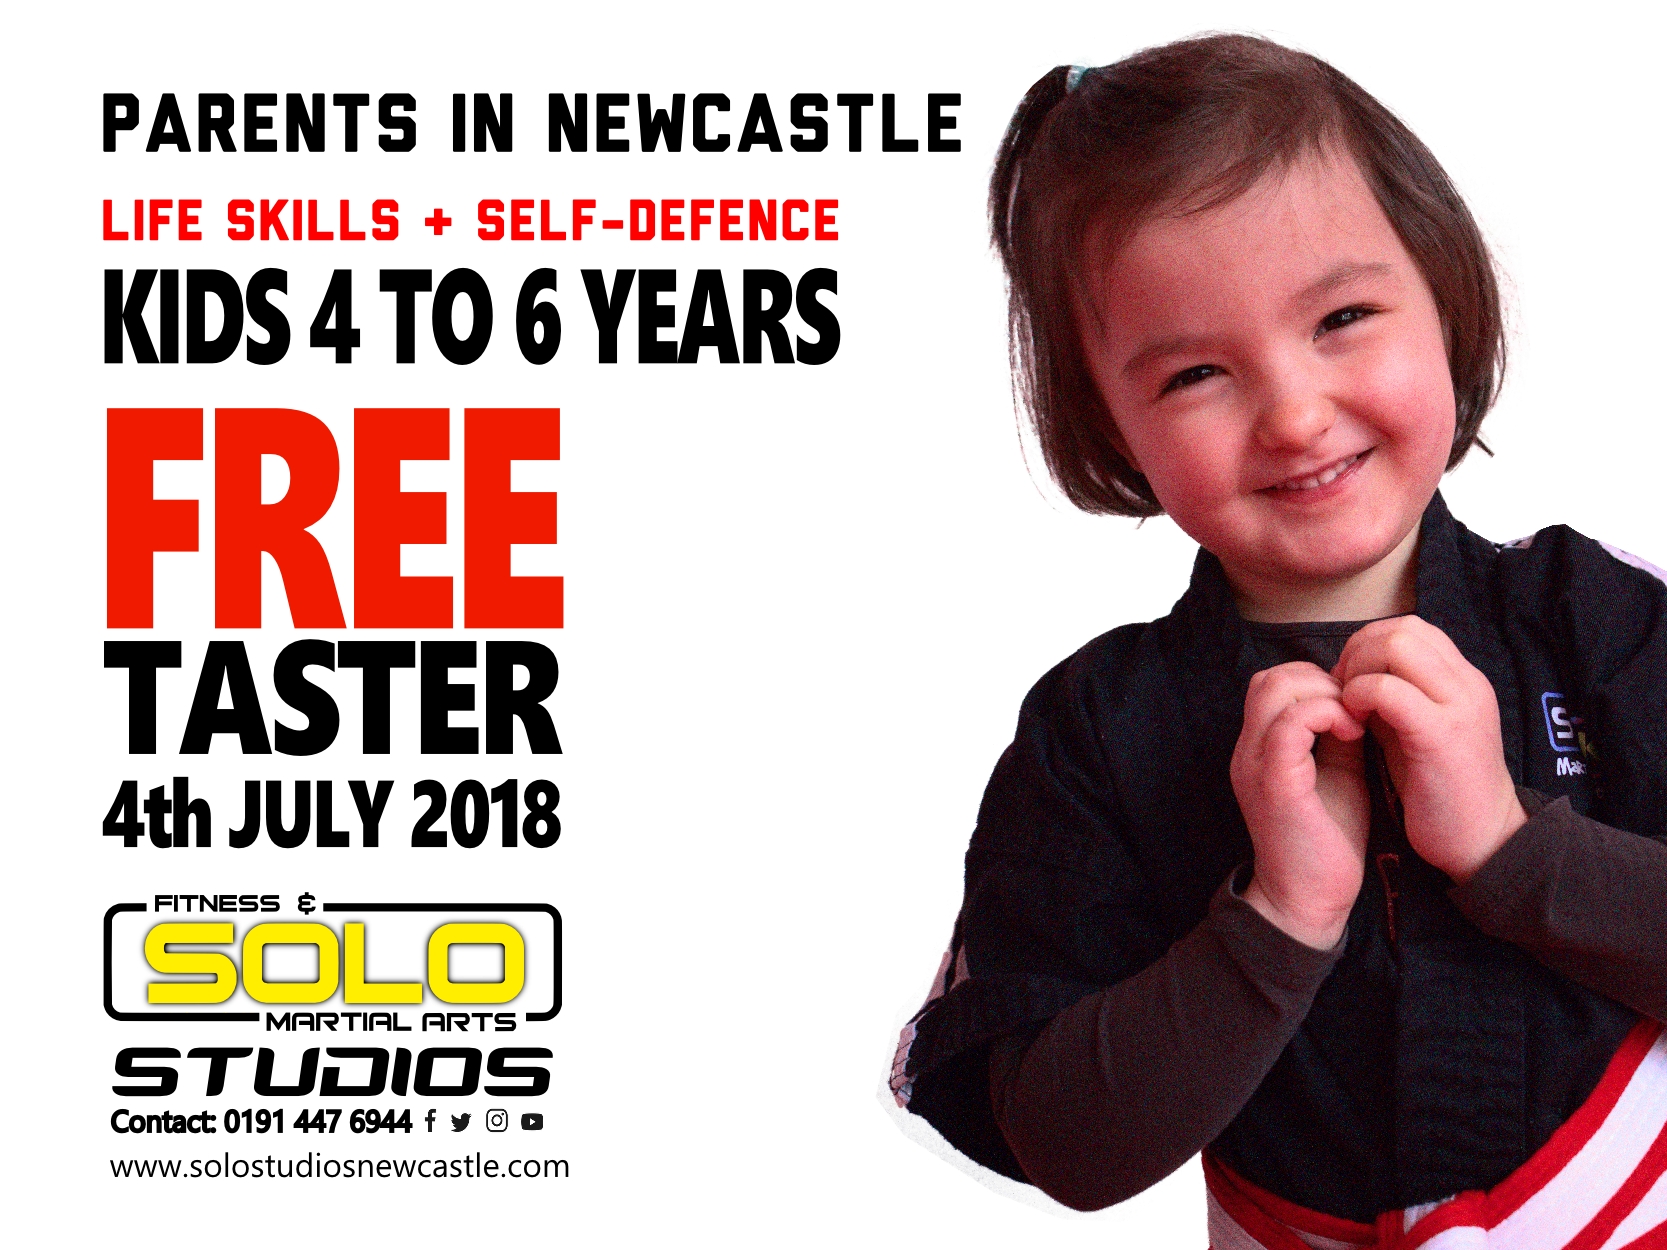 FREE Taster Kids Course announced in Newcastle!